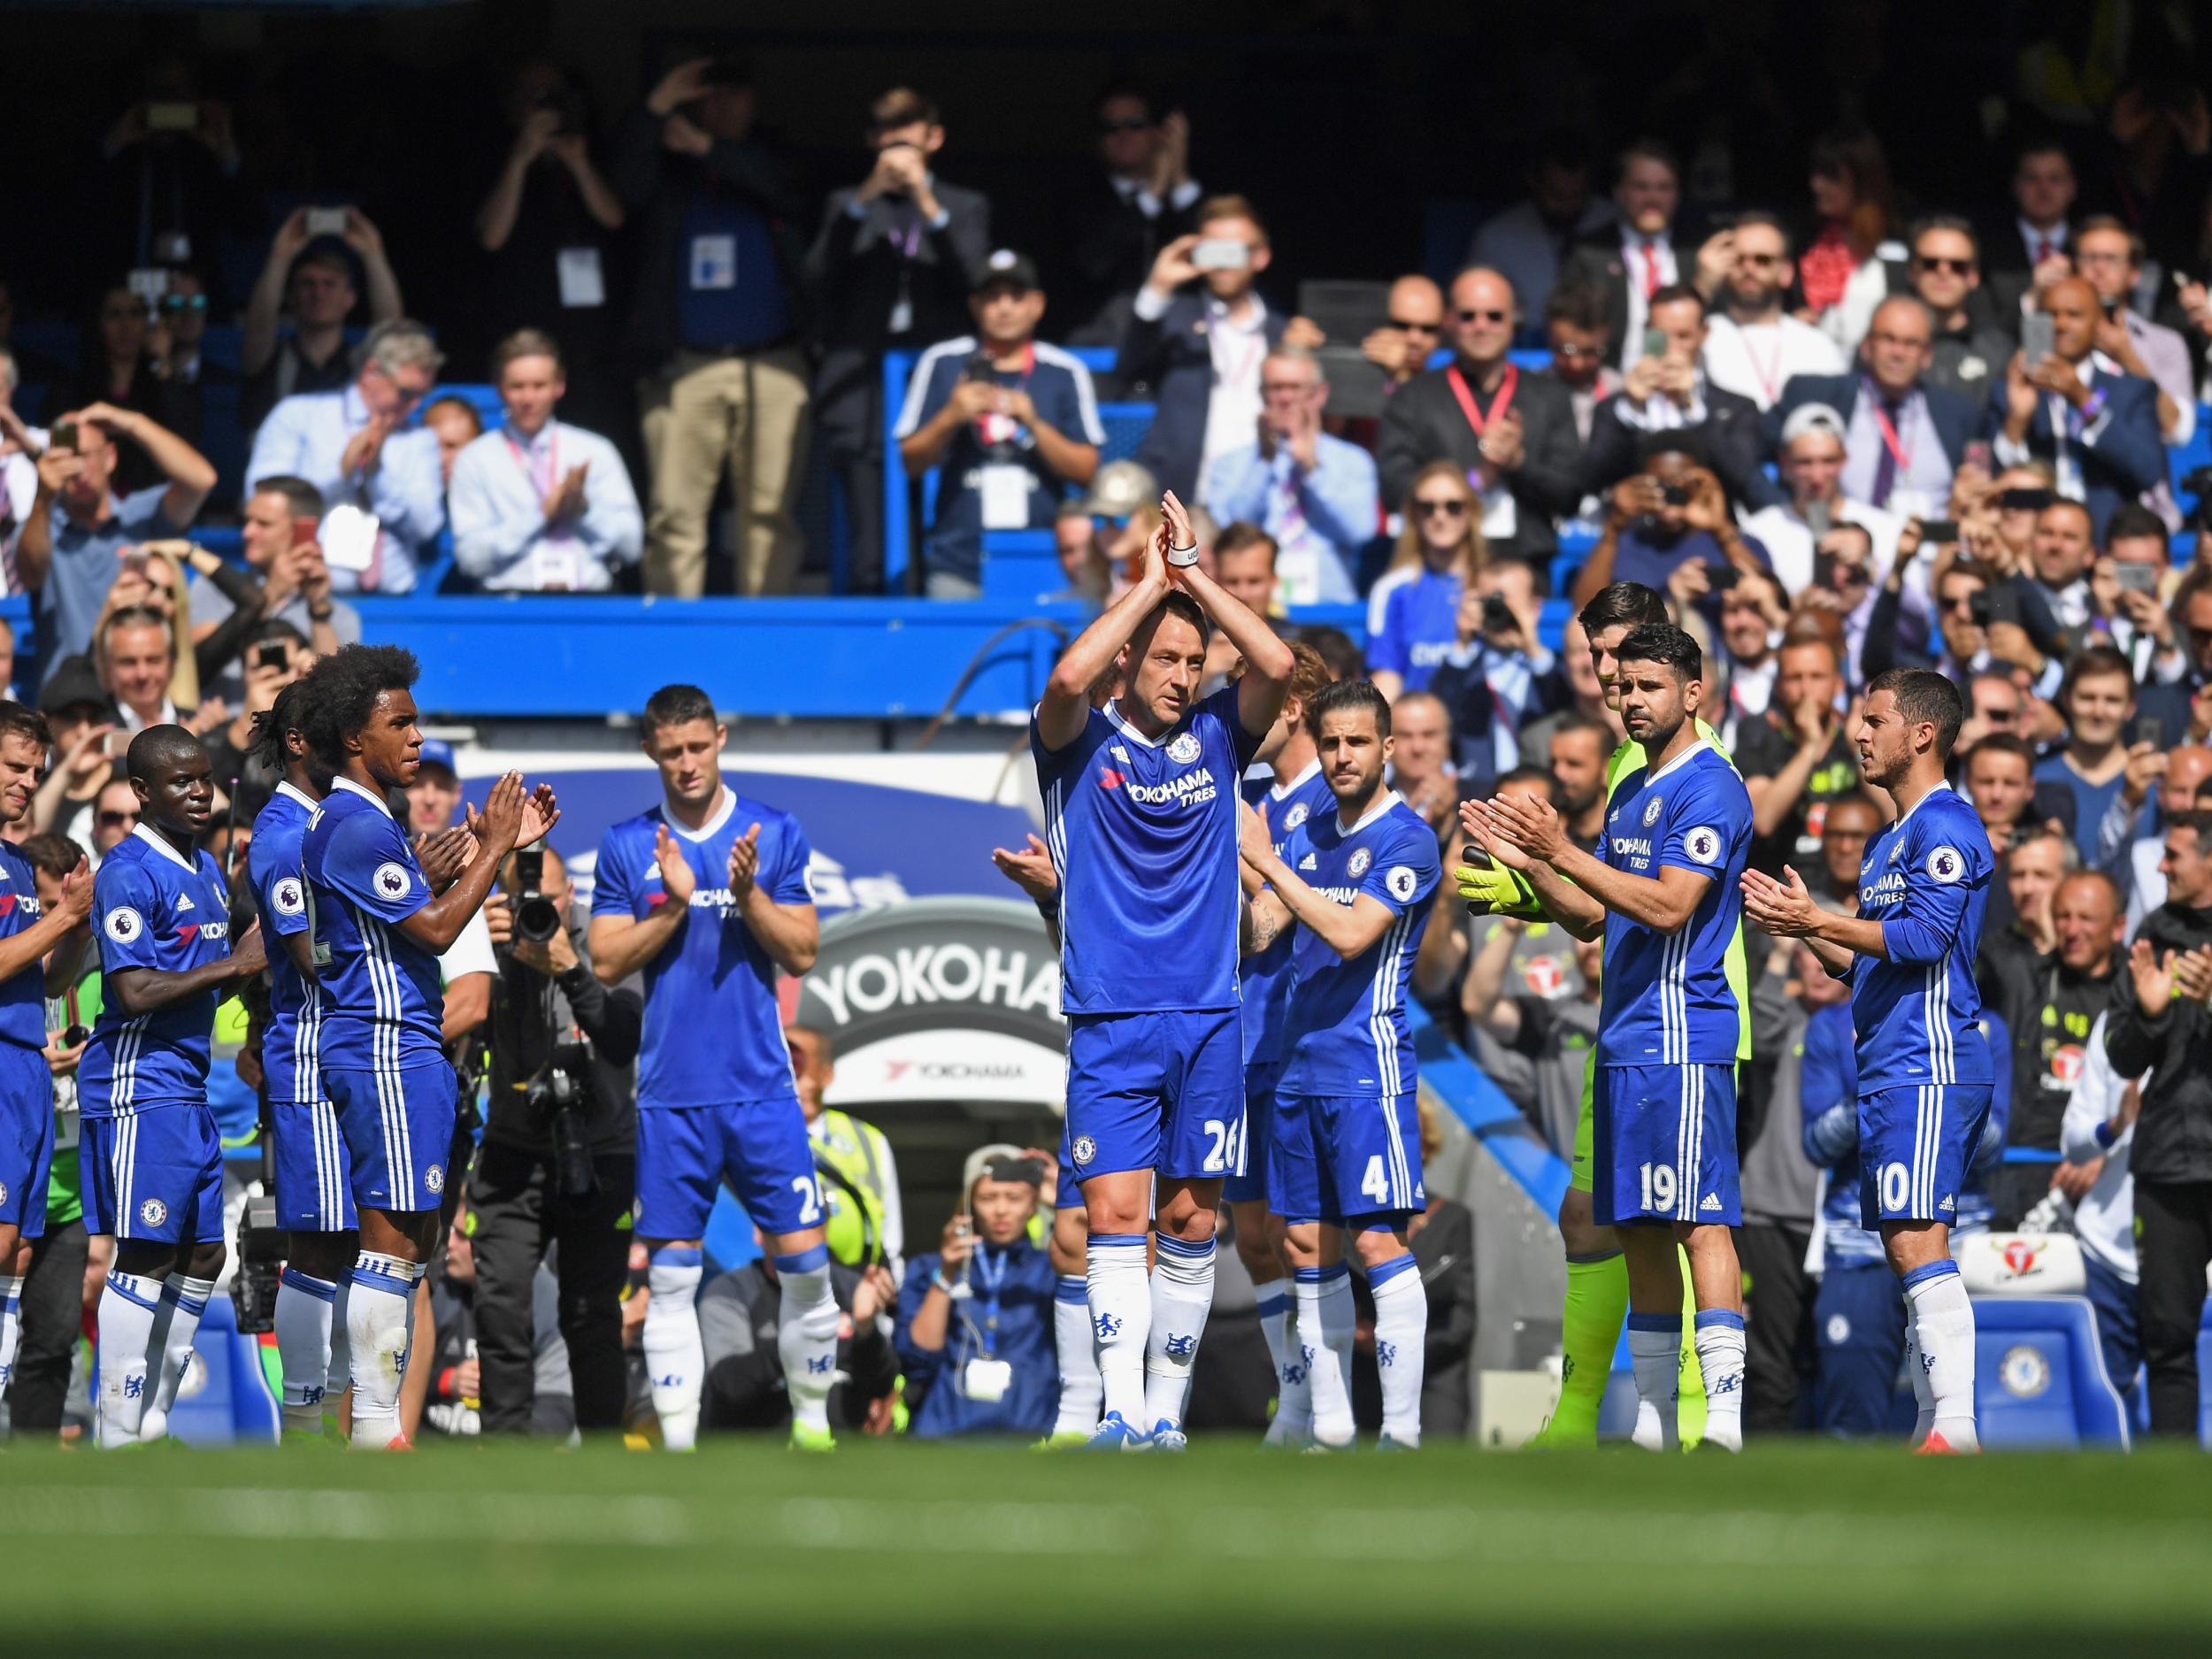 Terry was given an impromptu guard of honour as he left the pitch